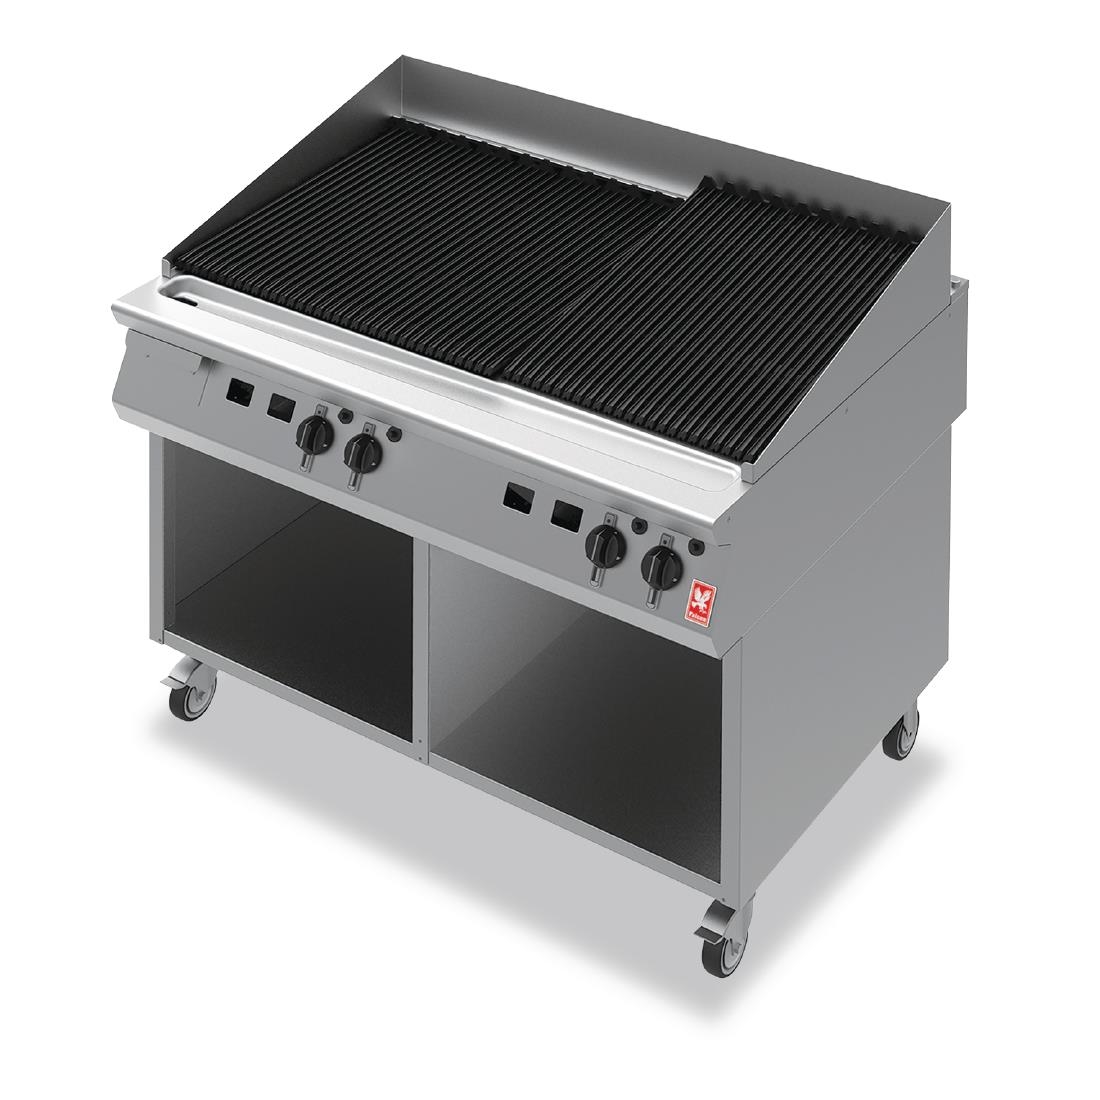 Falcon F900 Chargrill on Mobile Stand Propane Gas G94120